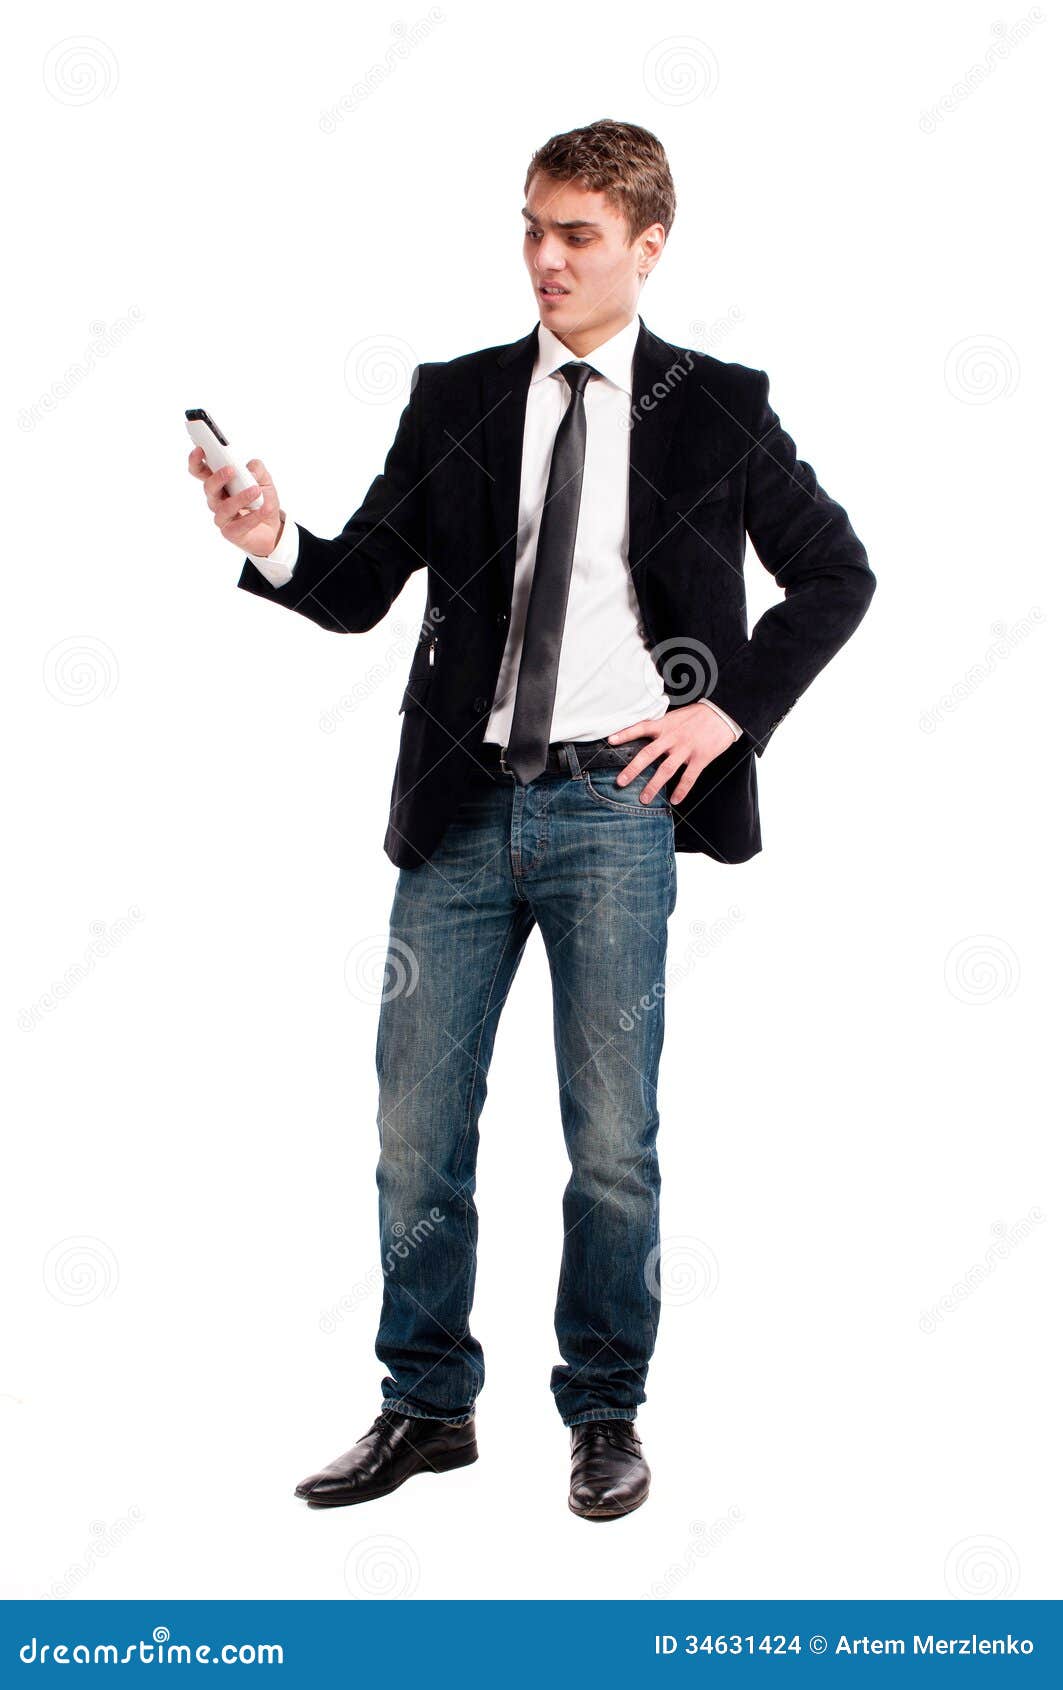 young-happy-man-holding-mobile-phone-portrait-handsome-business-using-cell-smiling-34631424.jpg